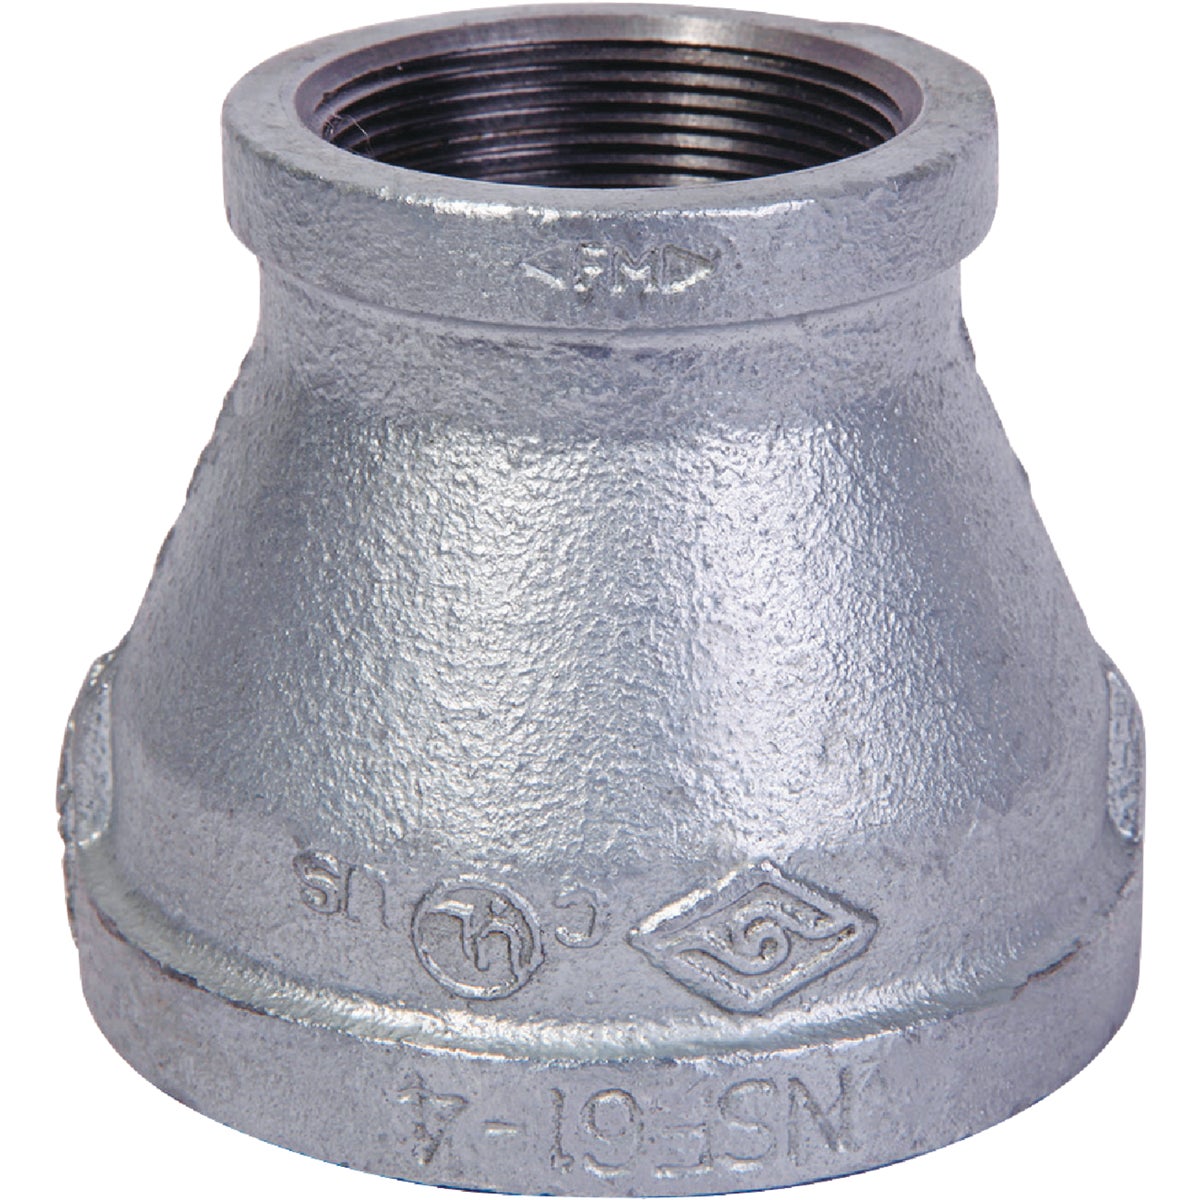 Southland 511-387BG Southland 2 In. x 1-1/2 In. FPT Reducing Galvanized Coupling 511-387BG